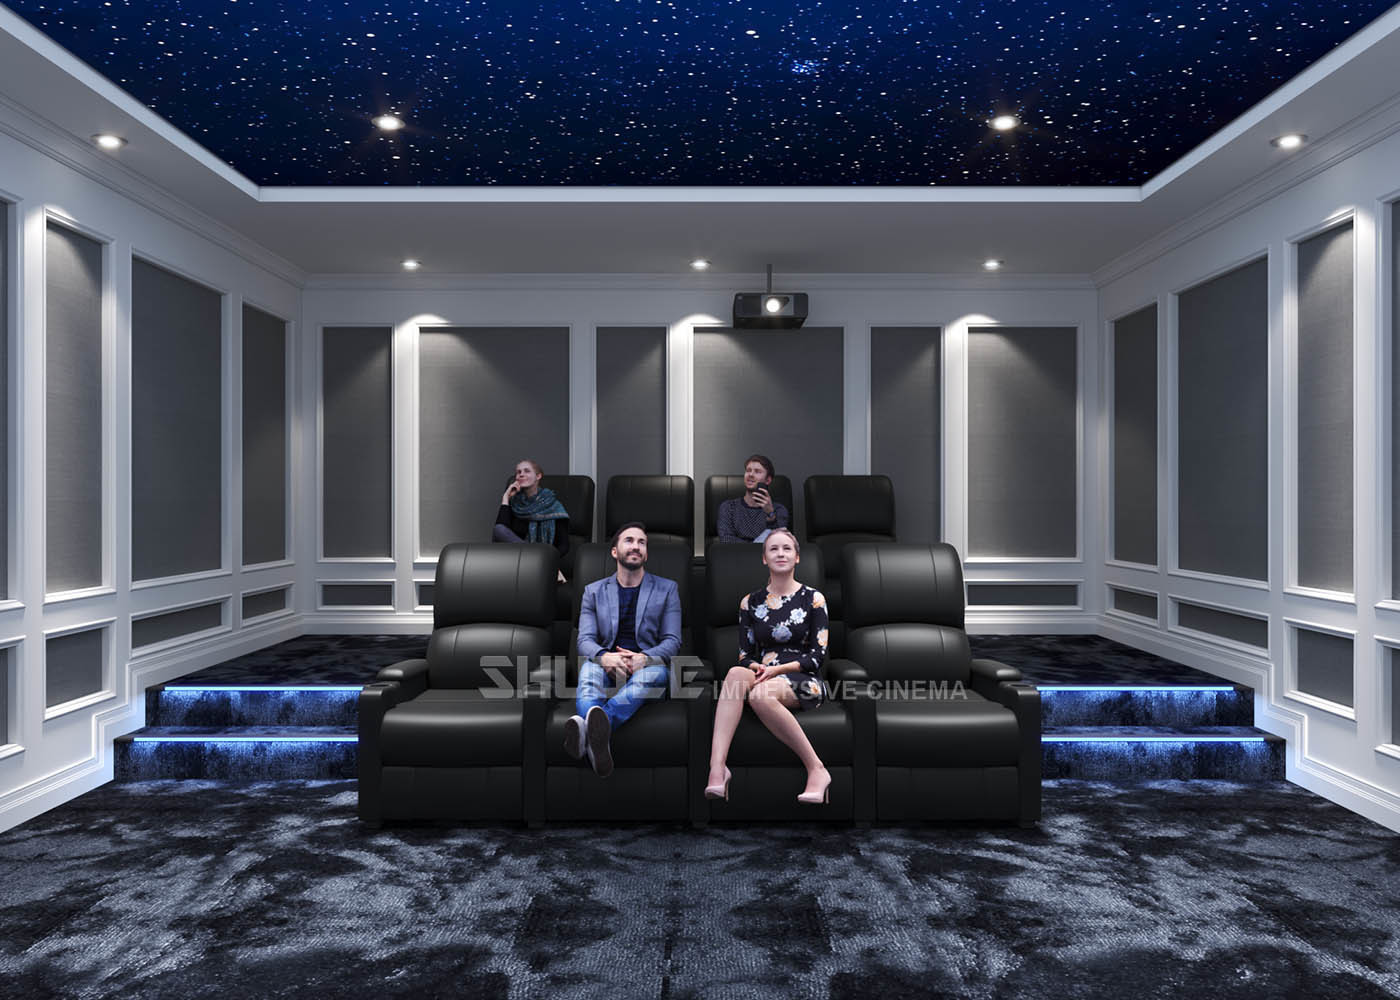  Home Cinema System With Black Recliner Sofa / Projects / Speakers / Screen Manufactures